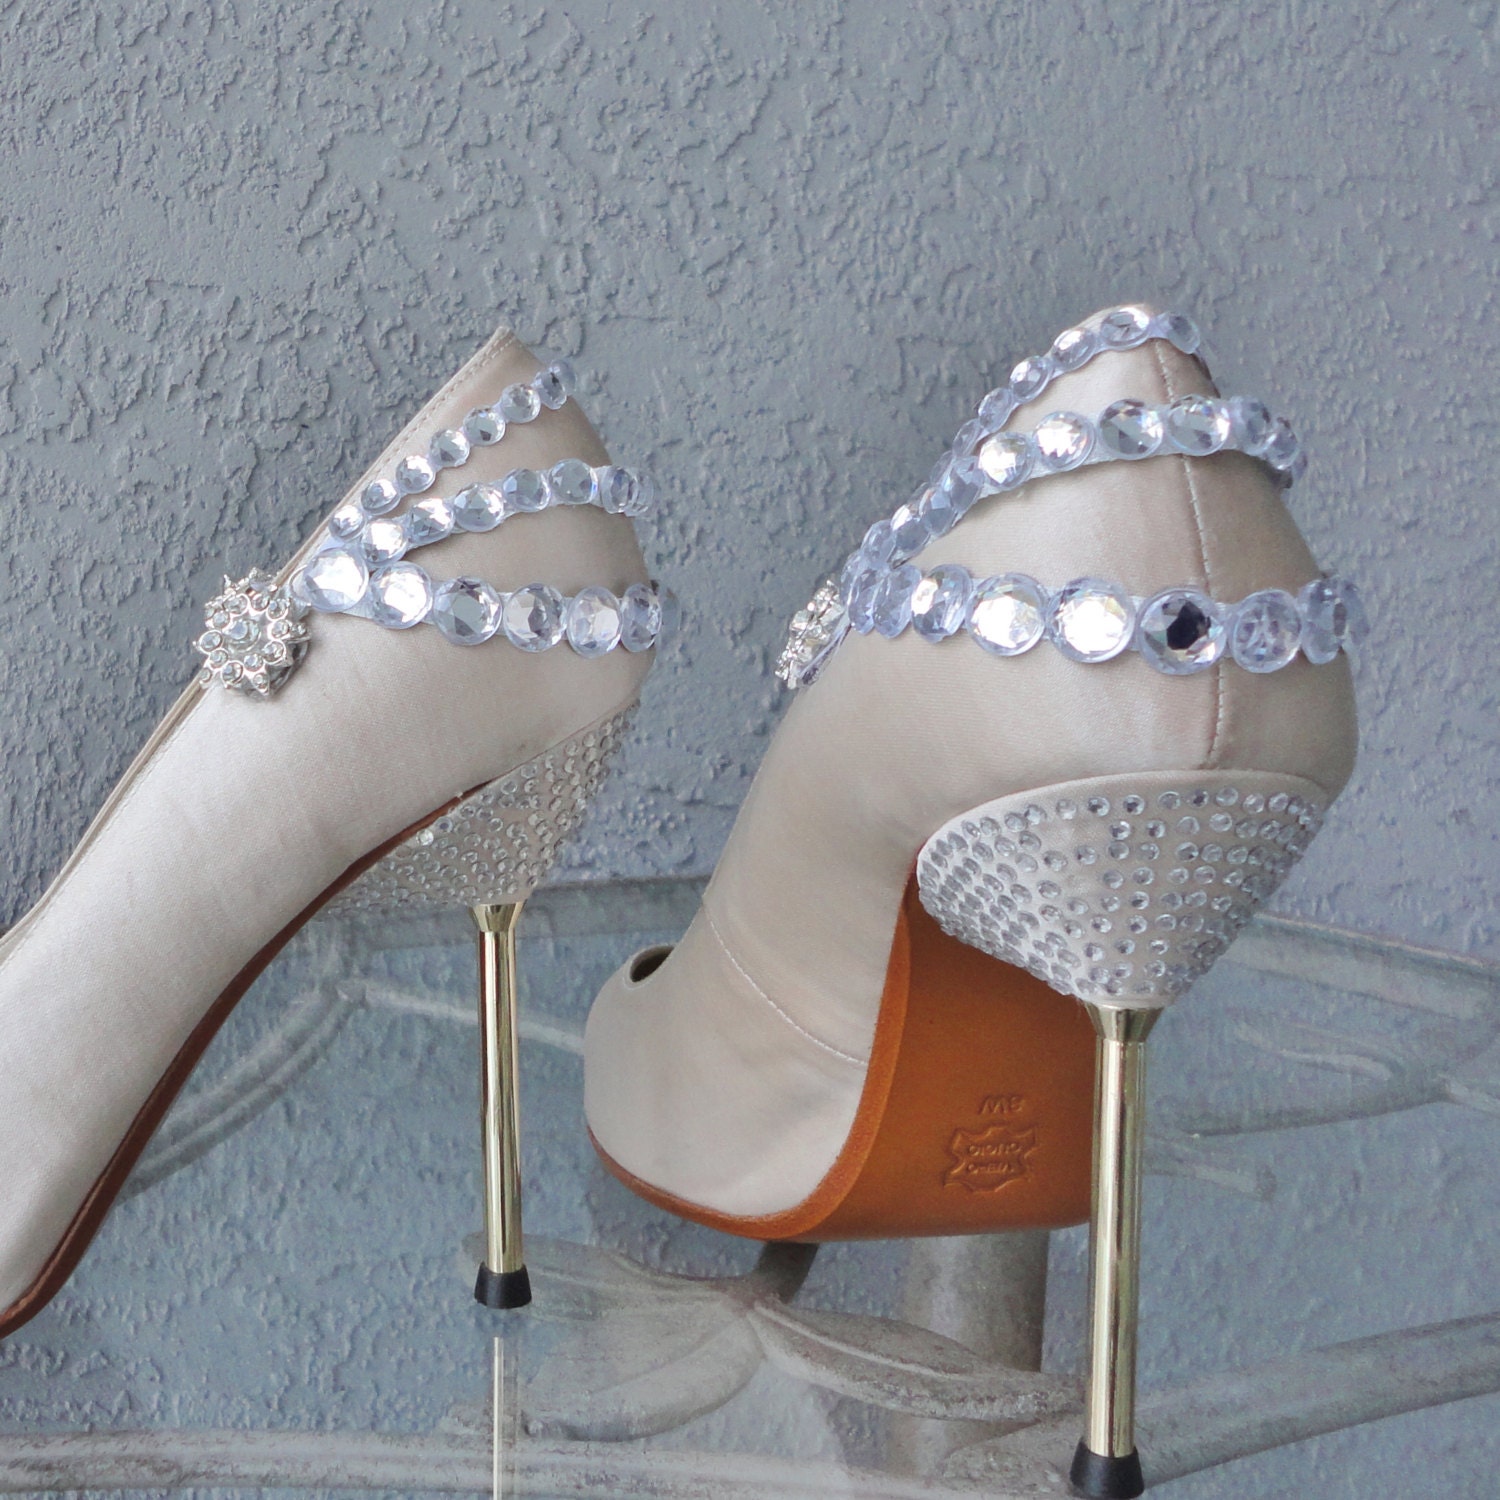 Glamorous Rhinestone Shoe Clips For The Back Of Your Shoe